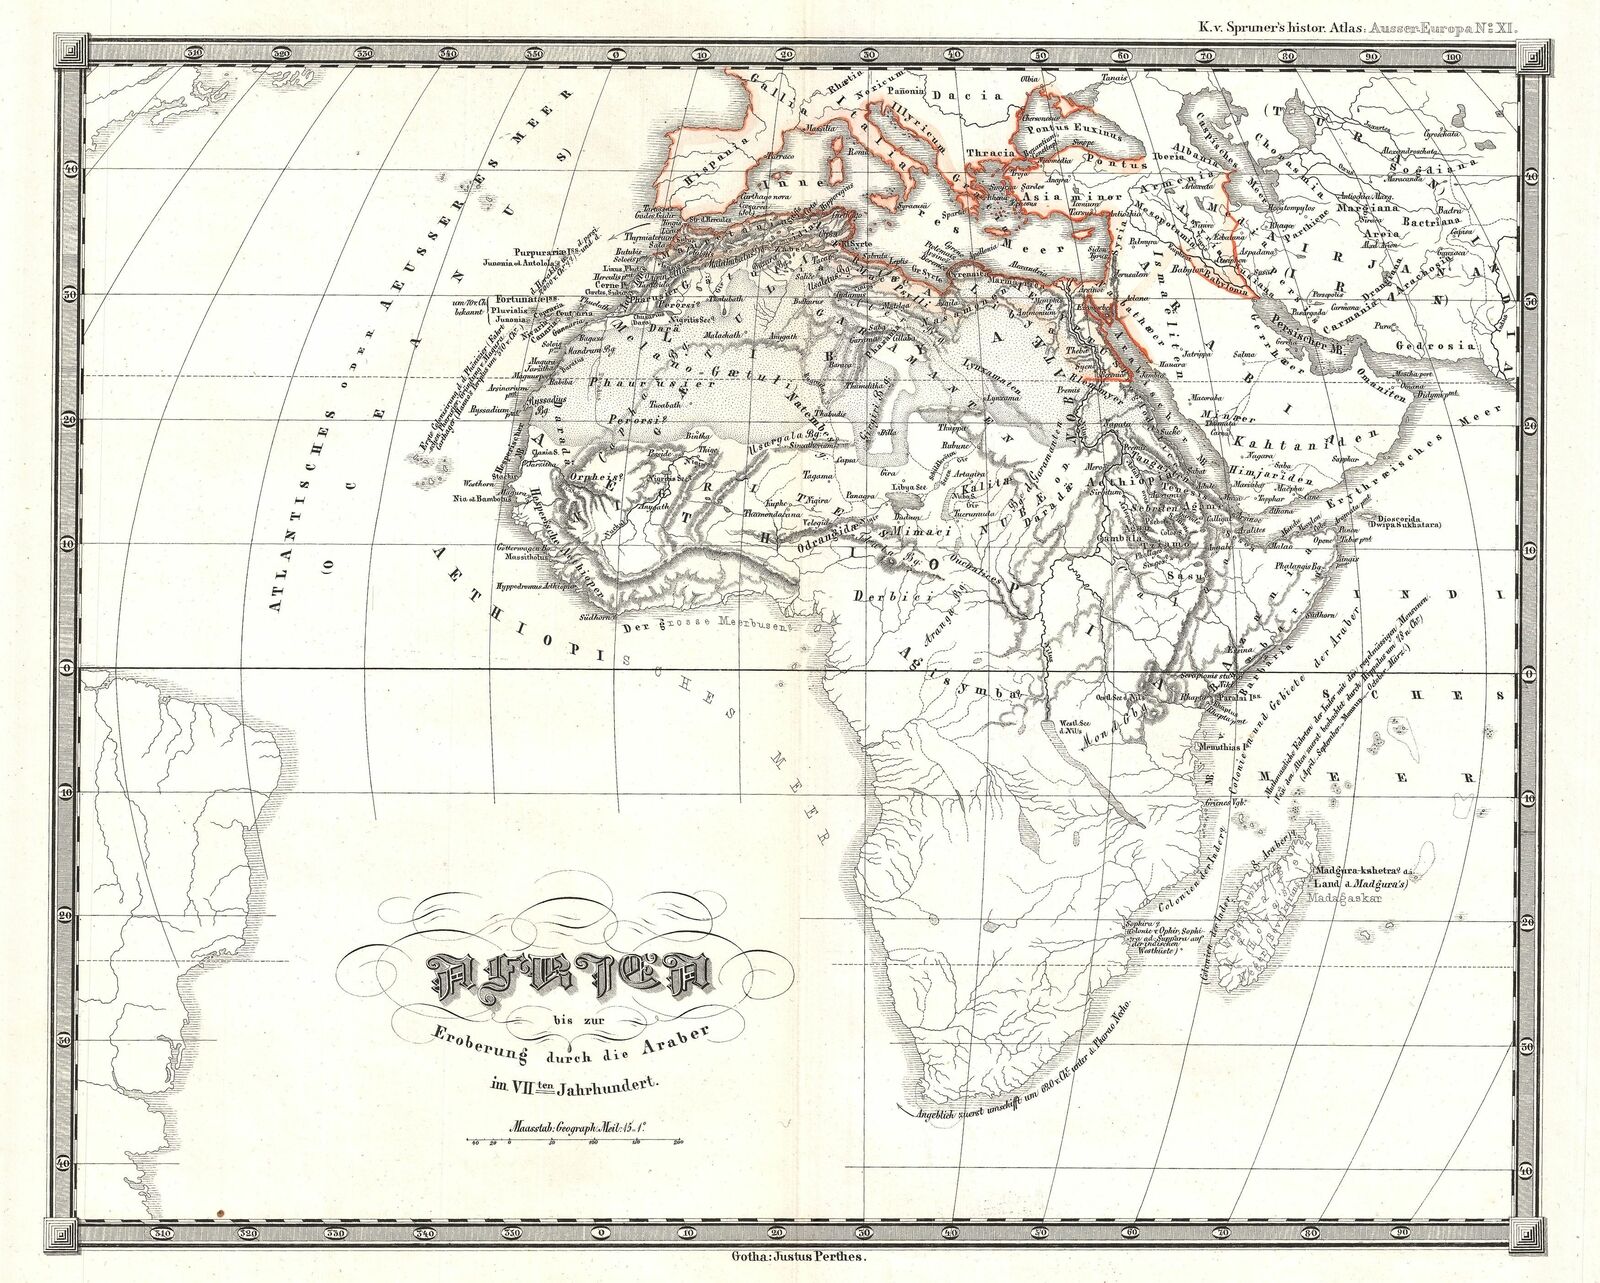 SALE 10%OFF 1855 Spruner Map of Africa up to conquests 7th in the c Arab 【スーパーセール】